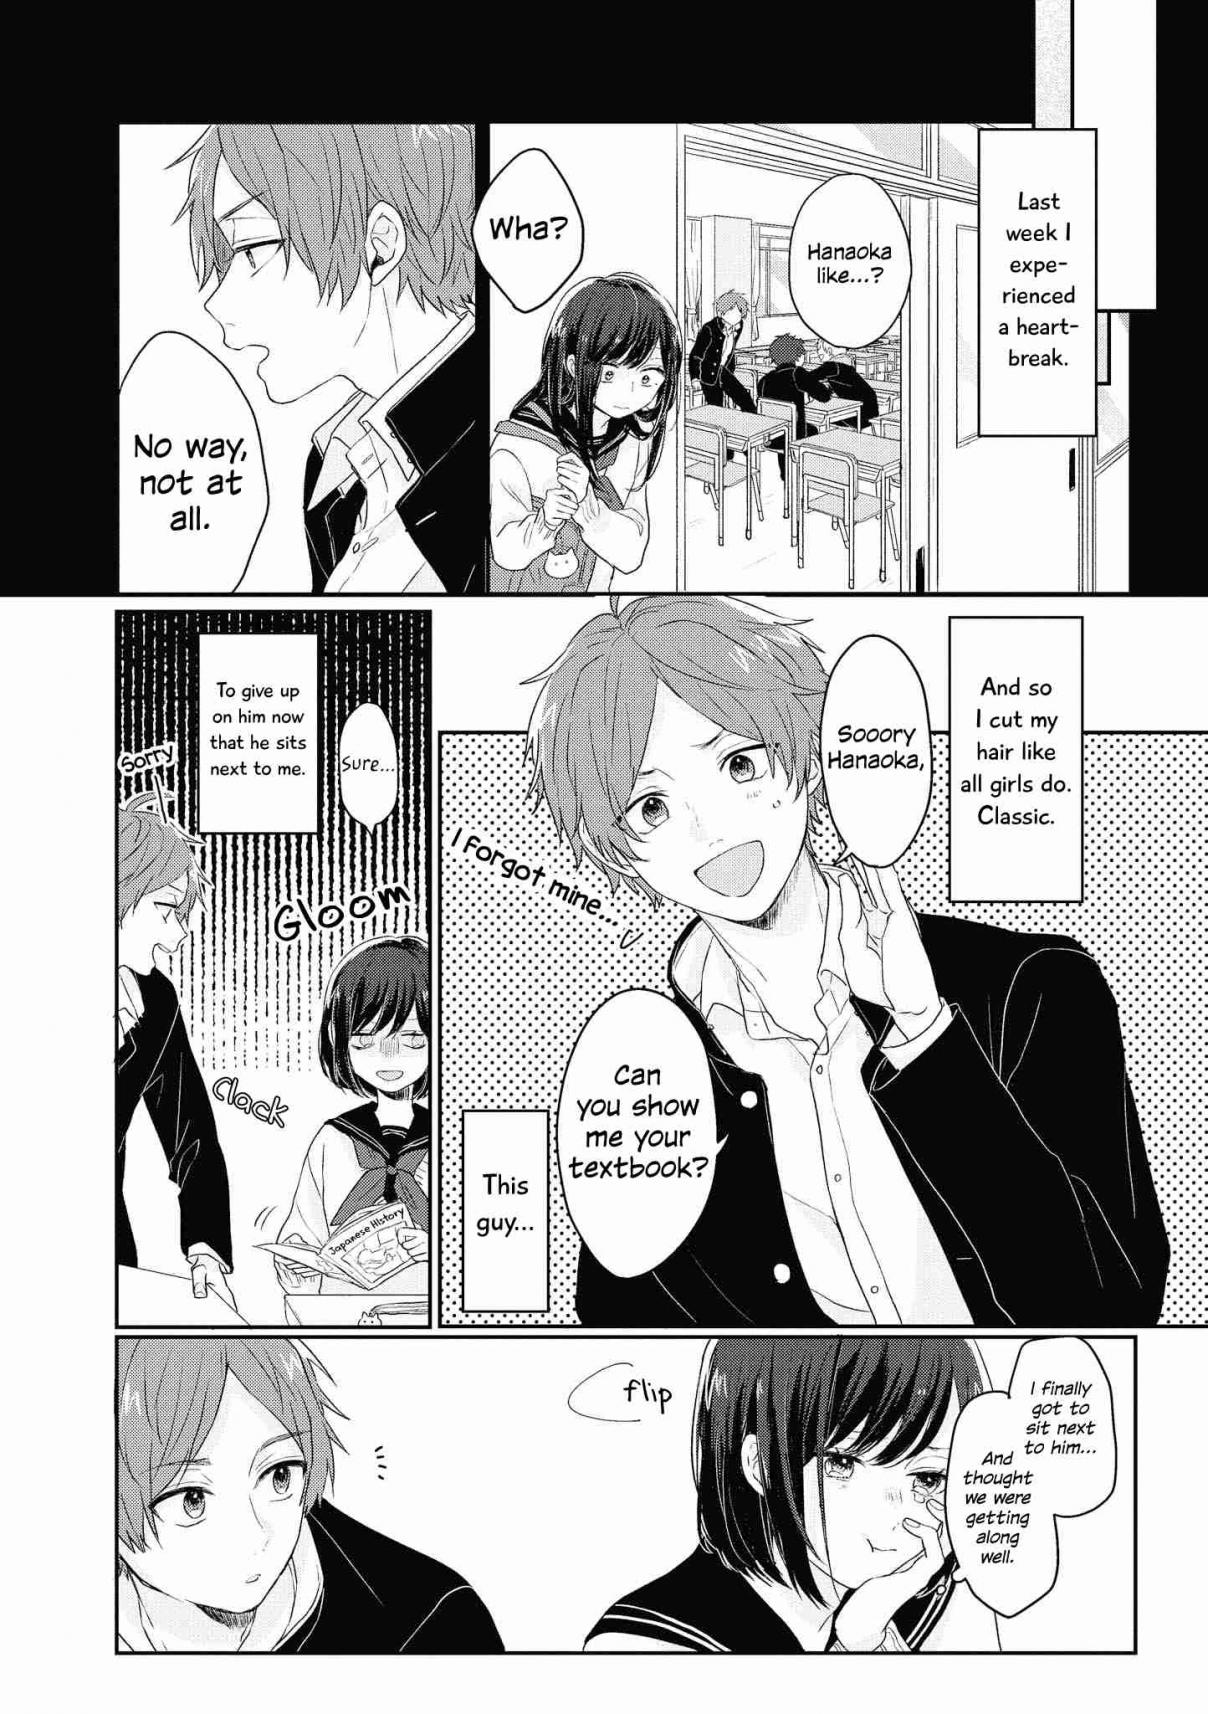 “It’s Too Precious and Hard to Read!!” 4P Short Stories Vol. 2 Ch. 27 To Cut, or Not to Cut [by Megumi Dorokawa]